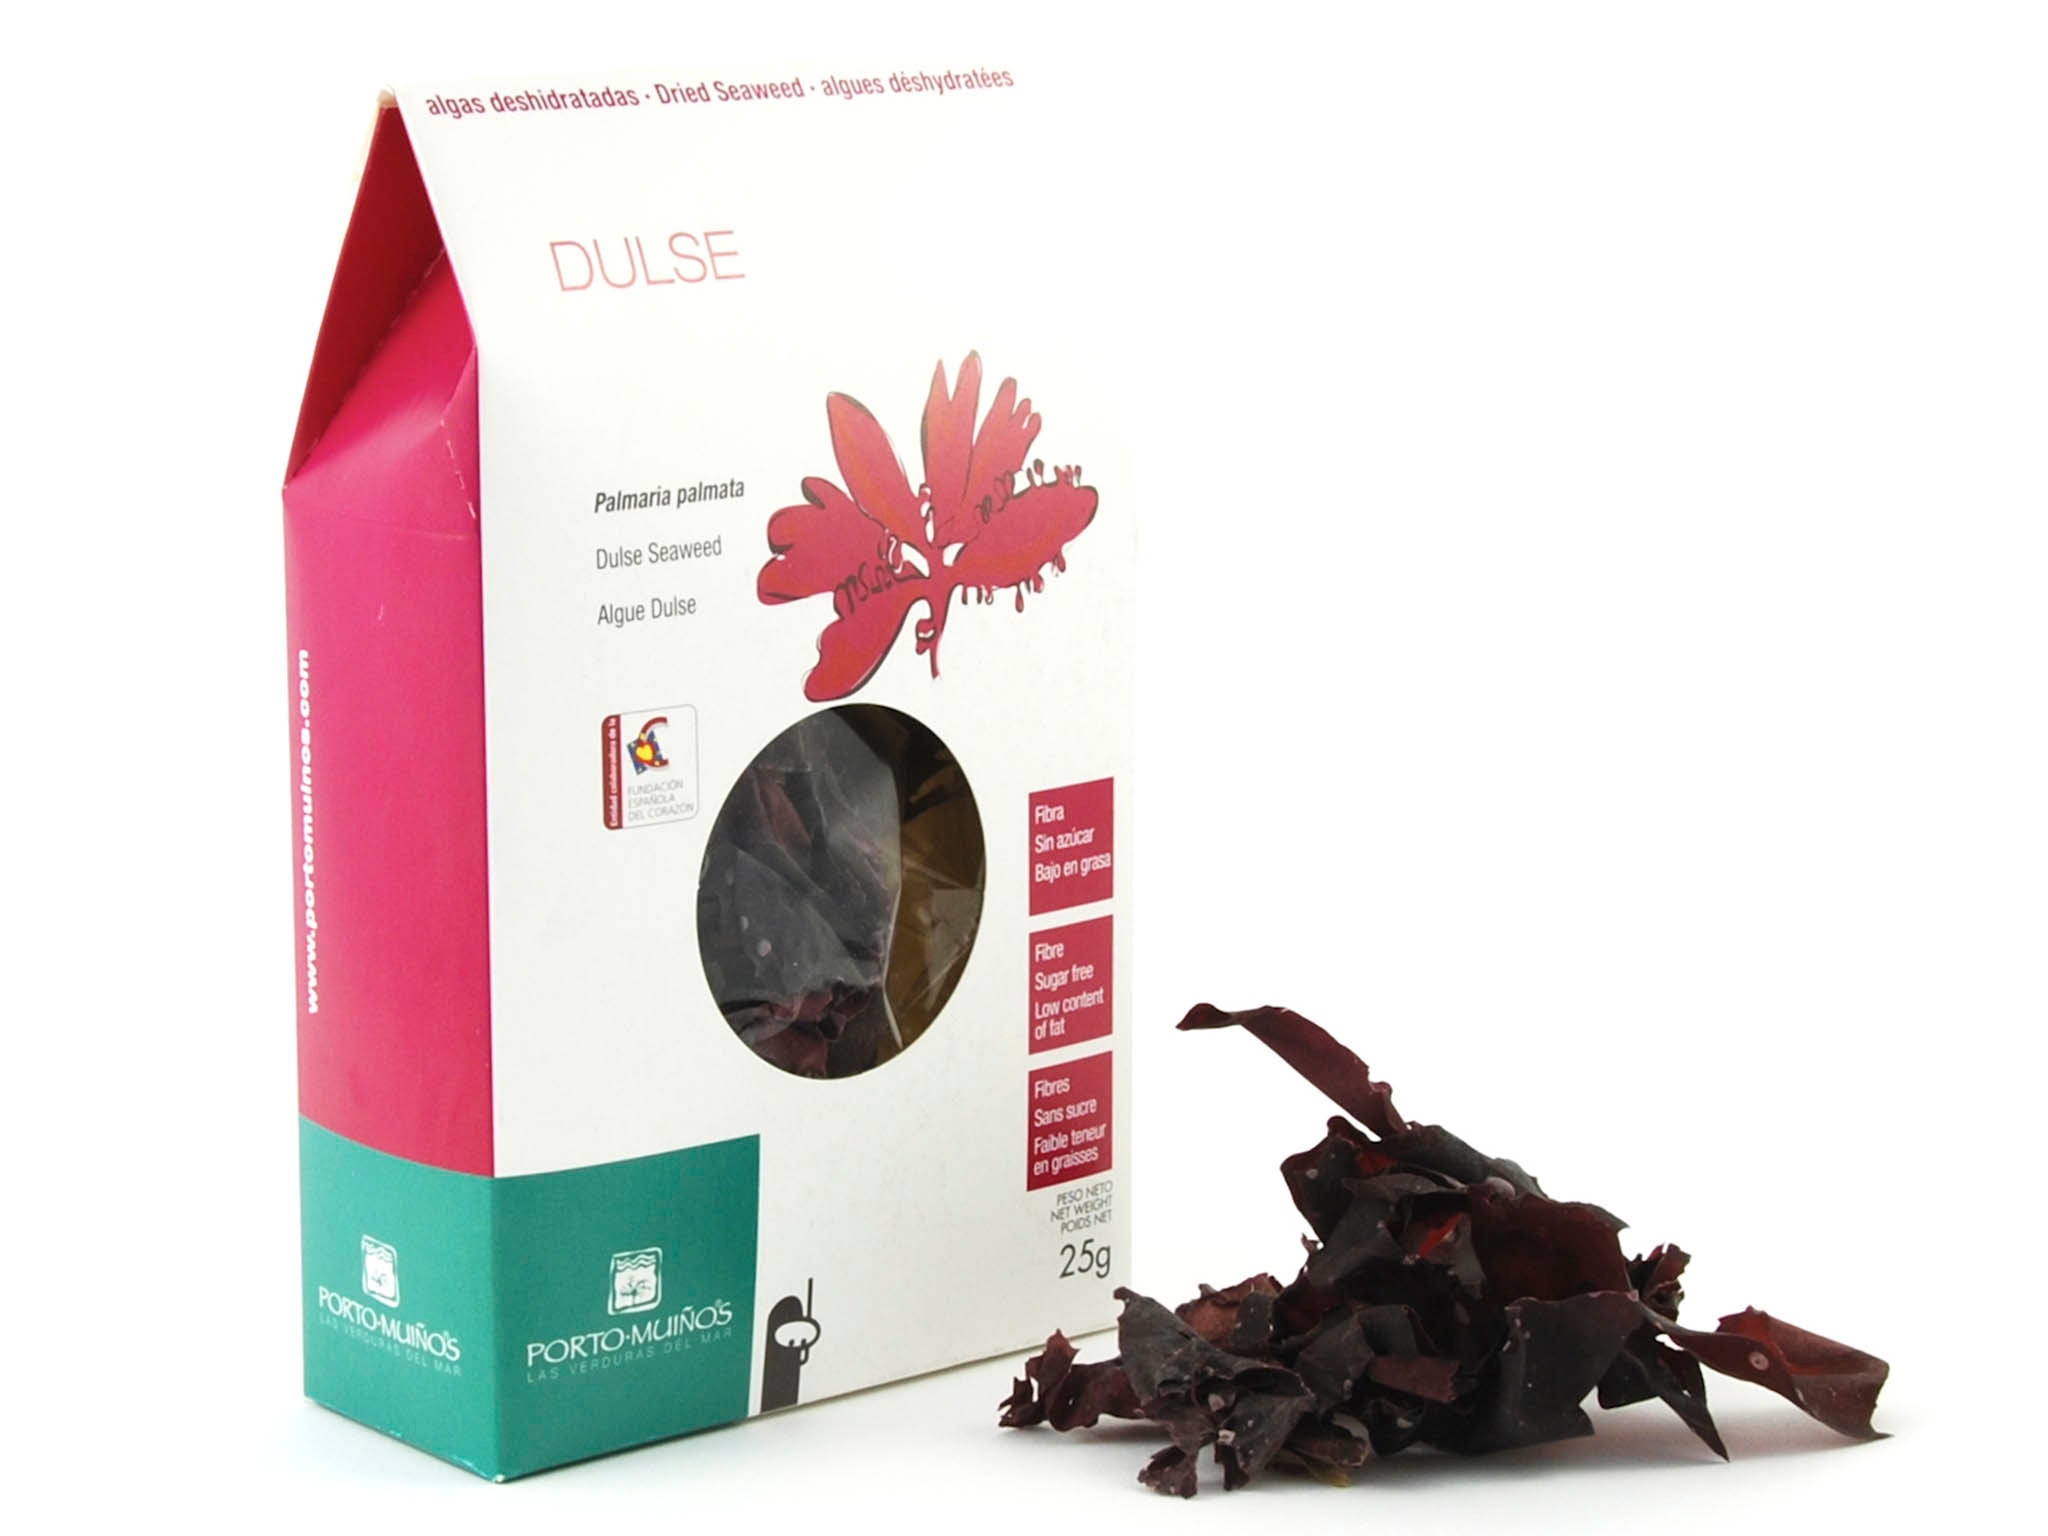 &#13;
Cooking with dried dulse has become increasingly popular &#13;